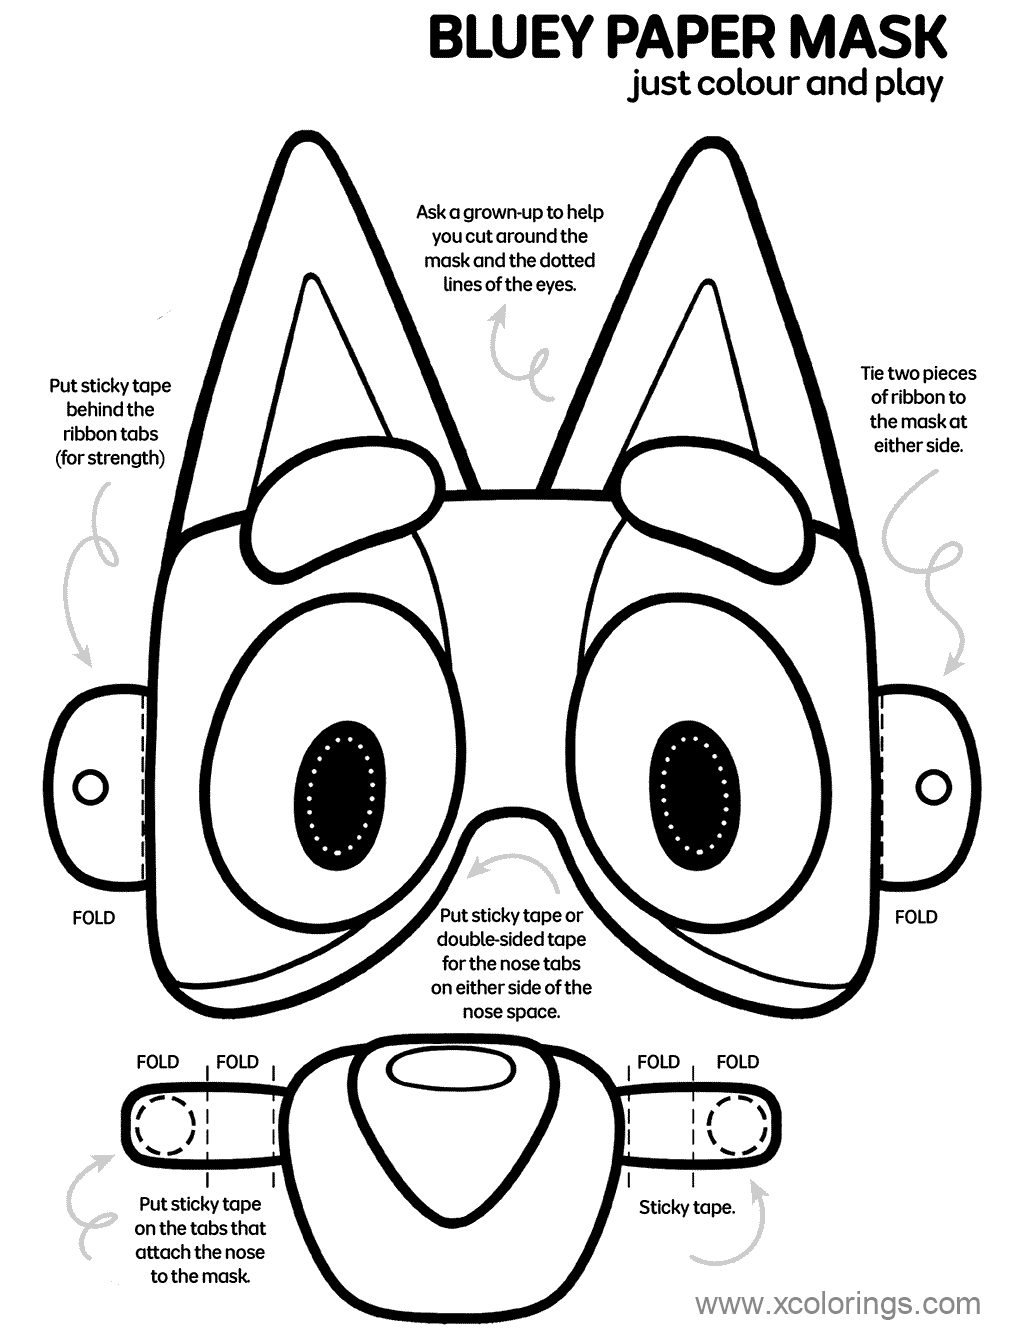 Free Bluey Mask Craft Coloring Pages printable